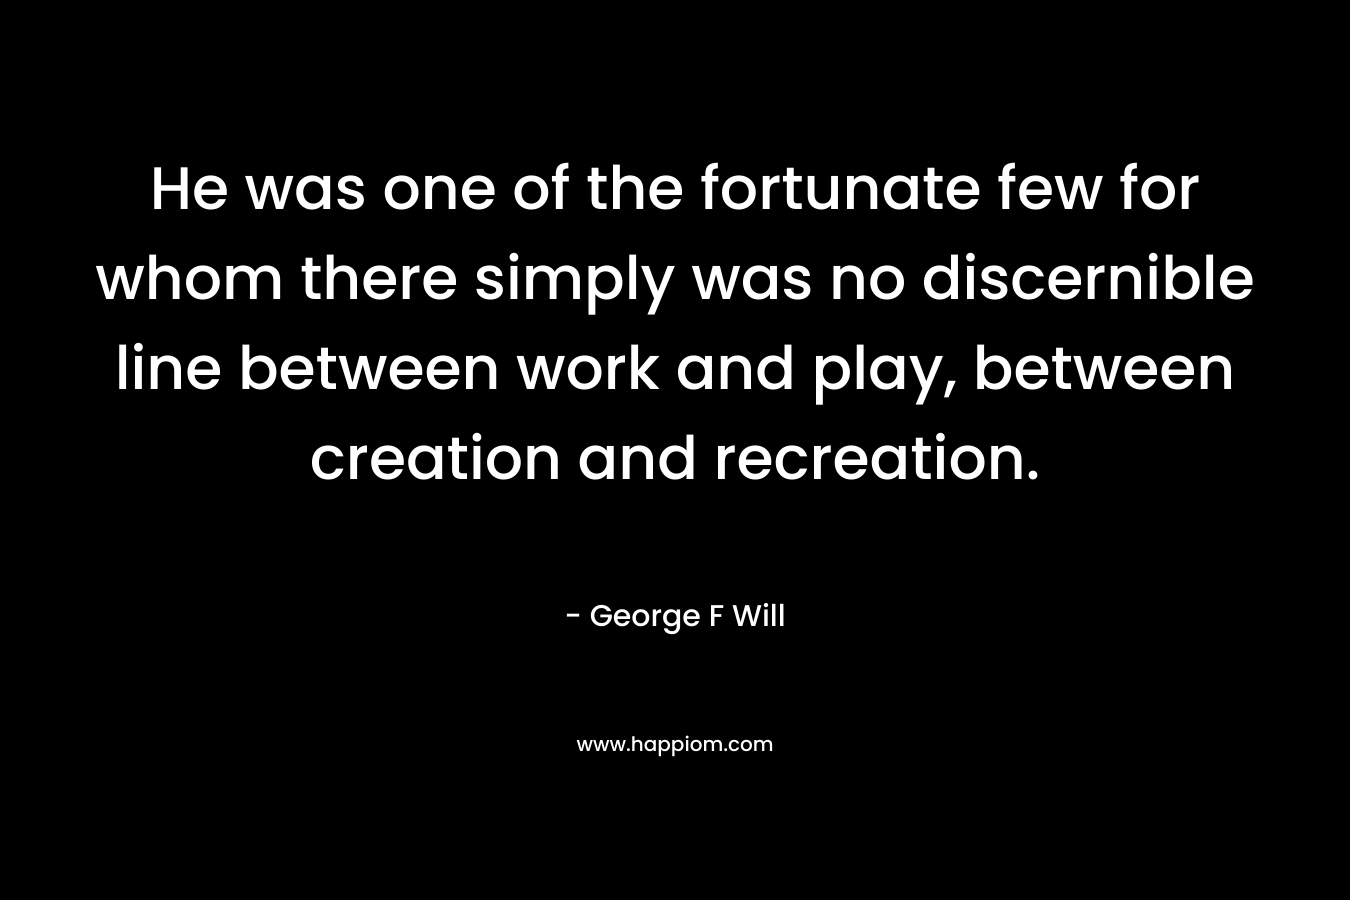 He was one of the fortunate few for whom there simply was no discernible line between work and play, between creation and recreation. – George F Will